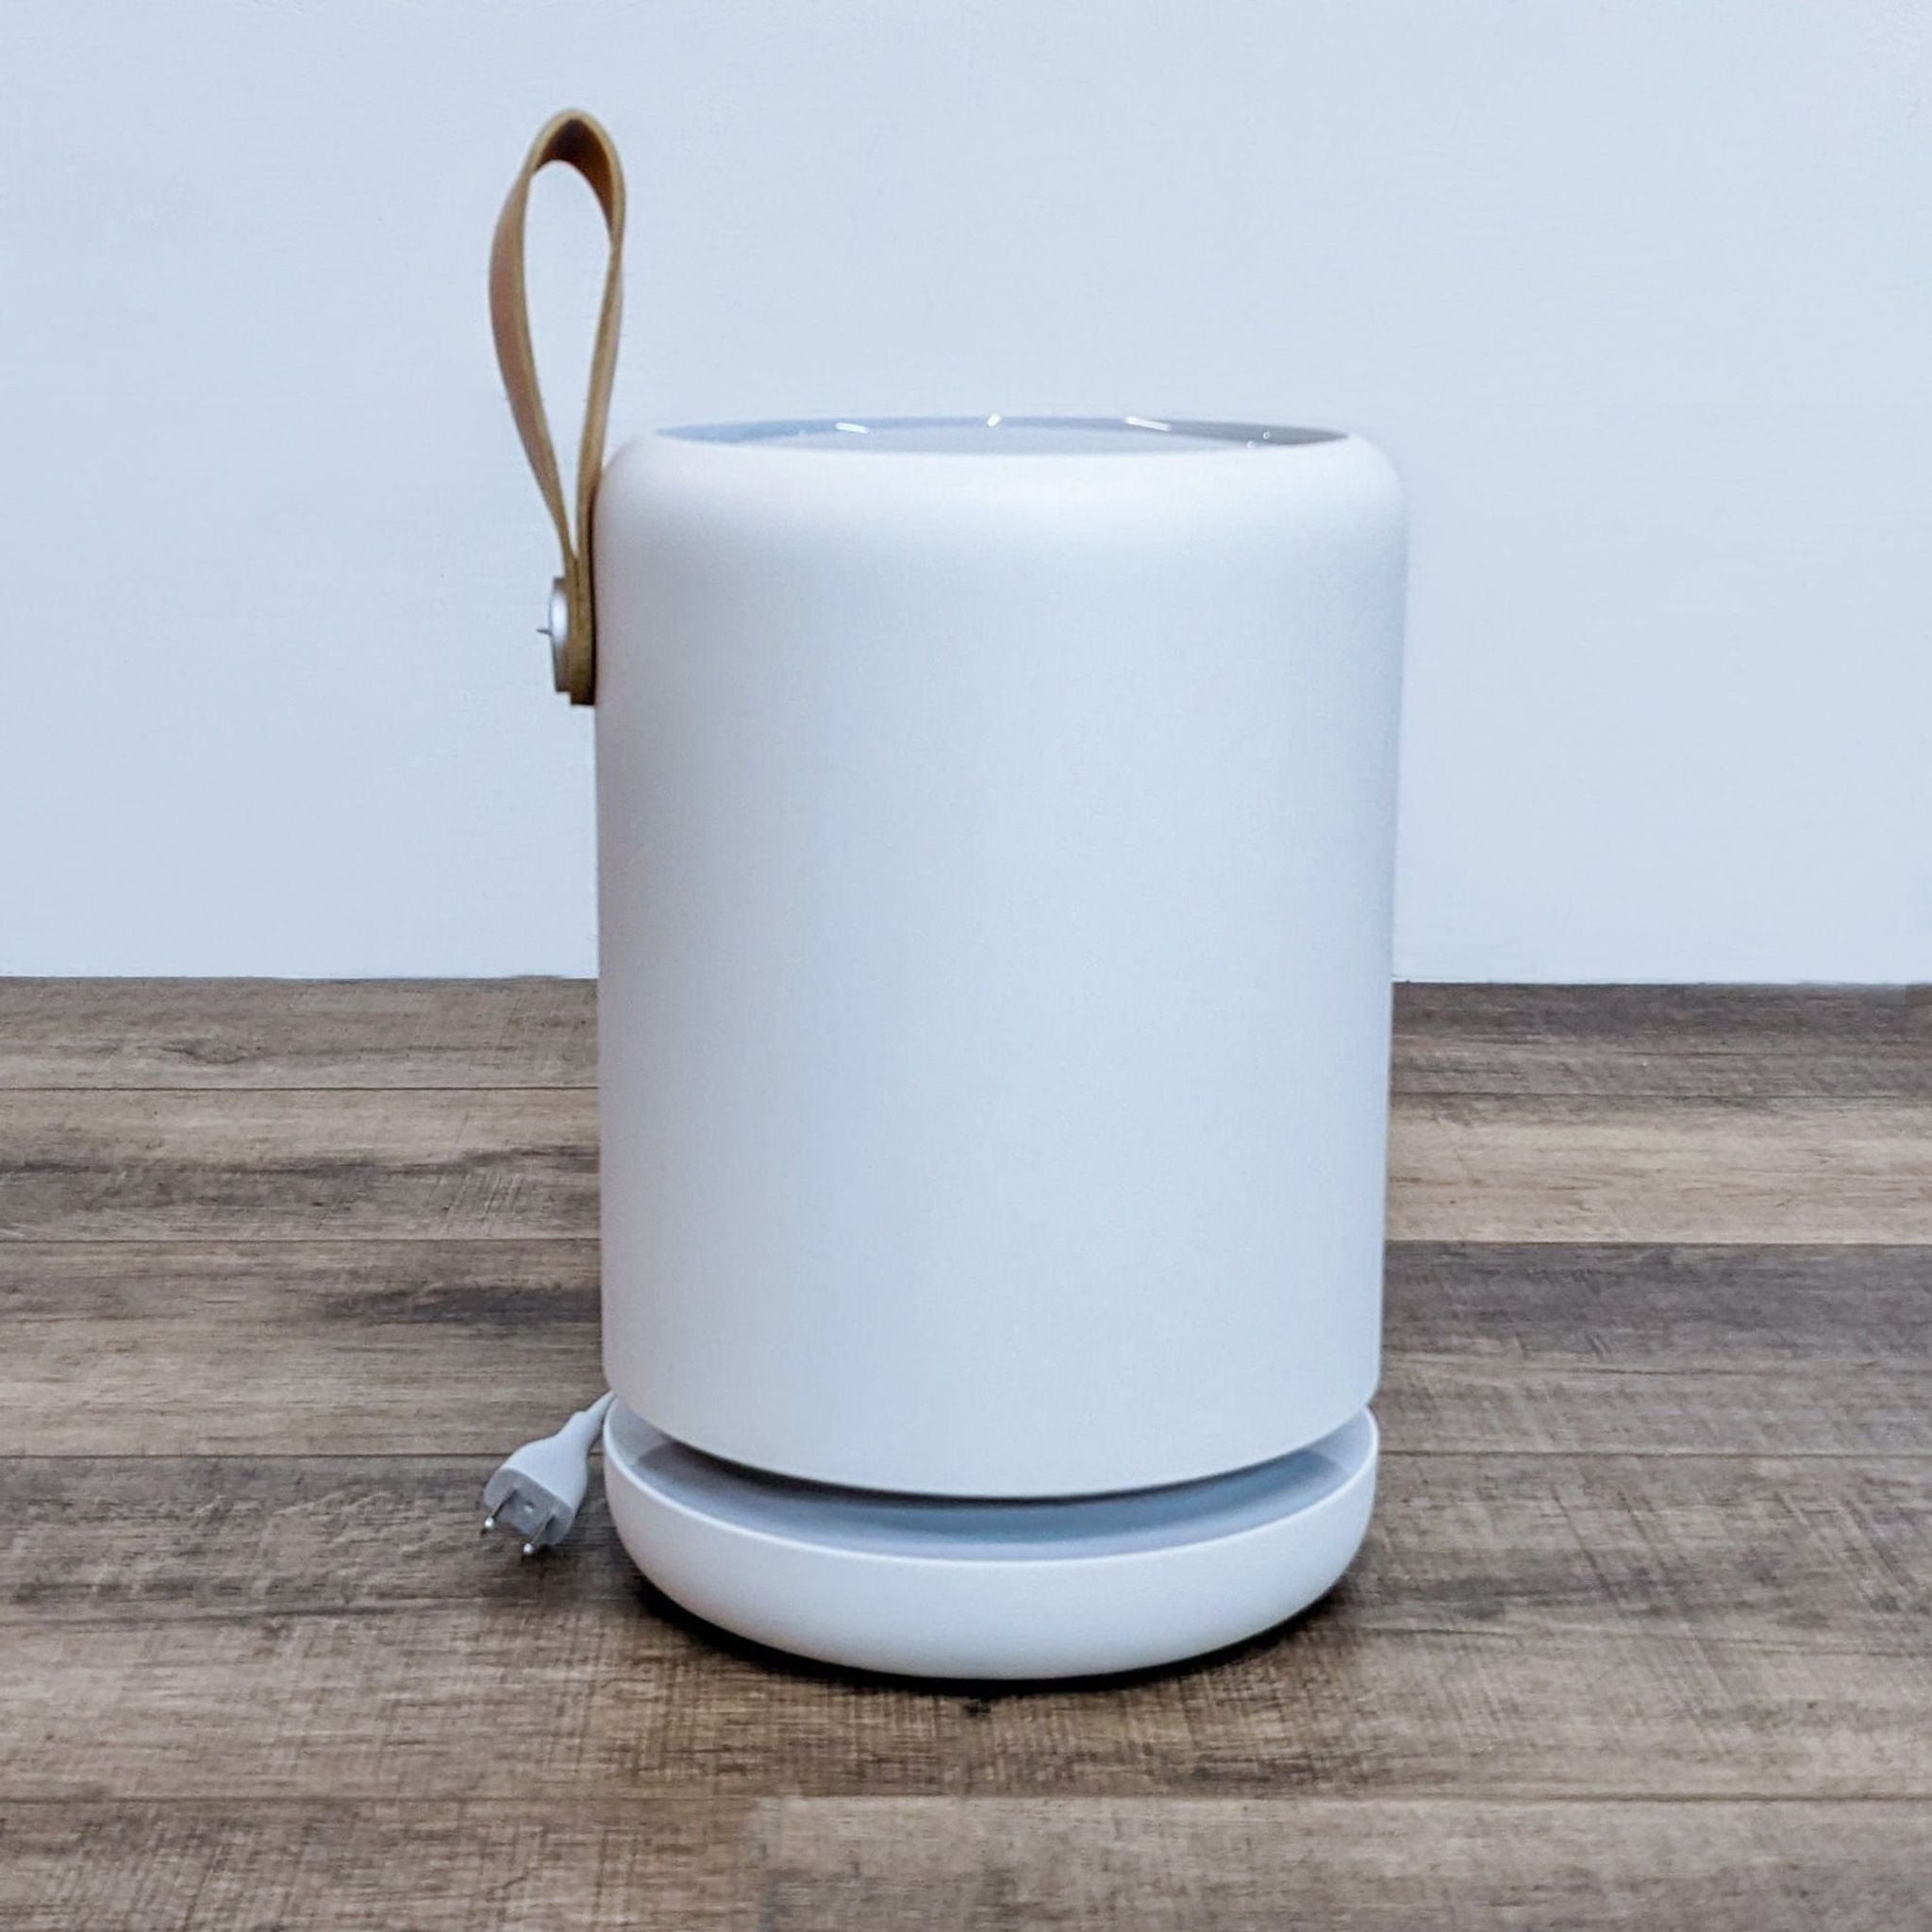 Molekule air purifier on wooden floor with a leather handle and a power cord.